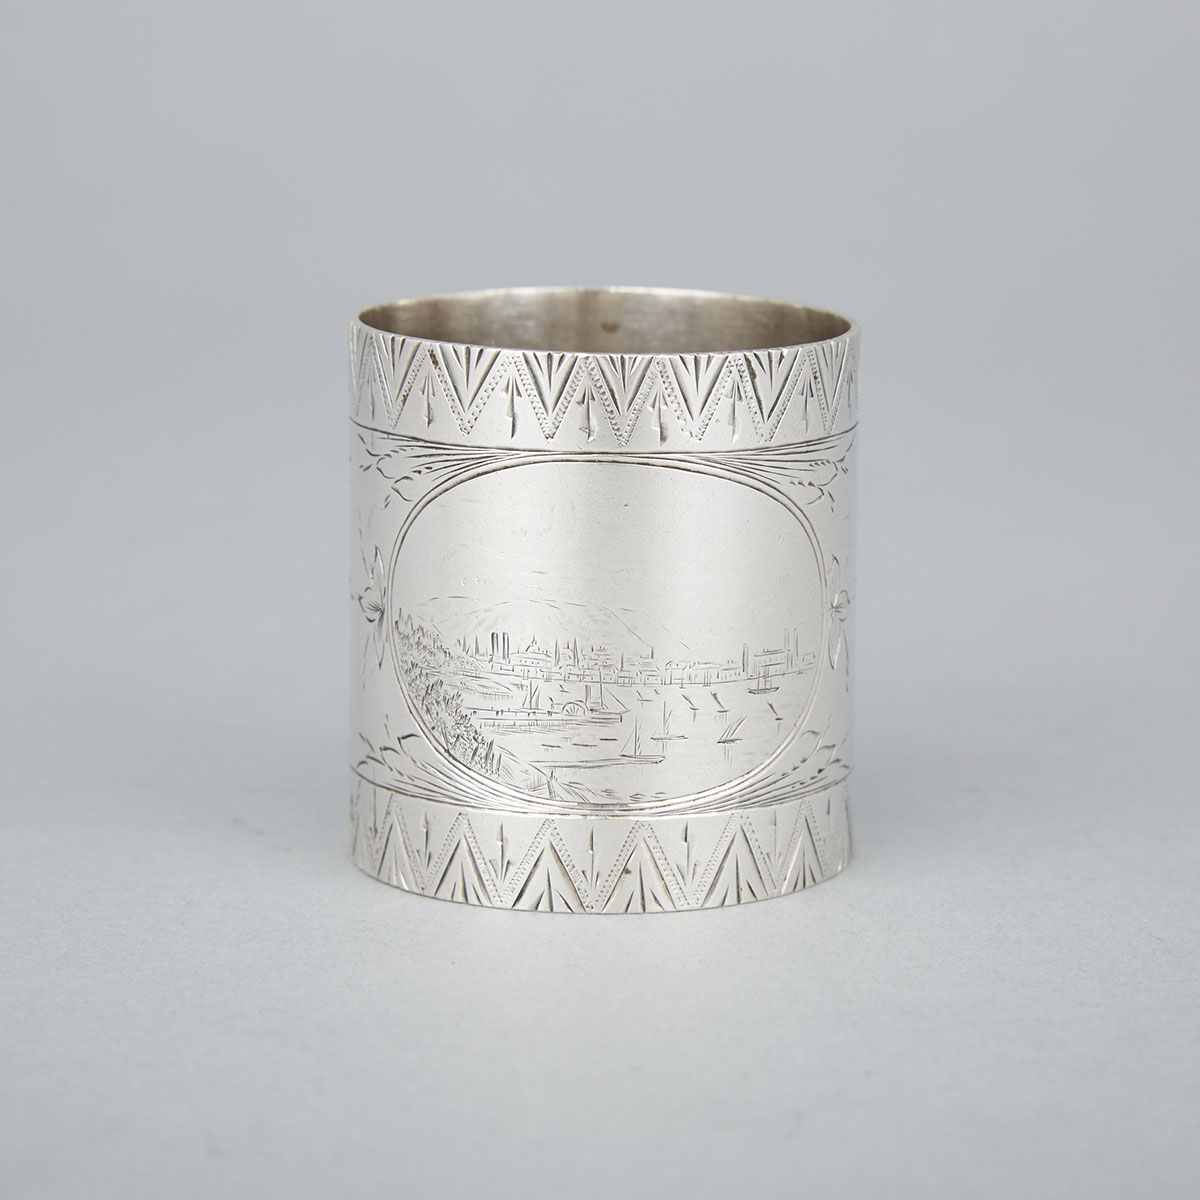 Canadian Silver Napkin Ring, J.R. Harper & Co., Montreal, Que., c.1880